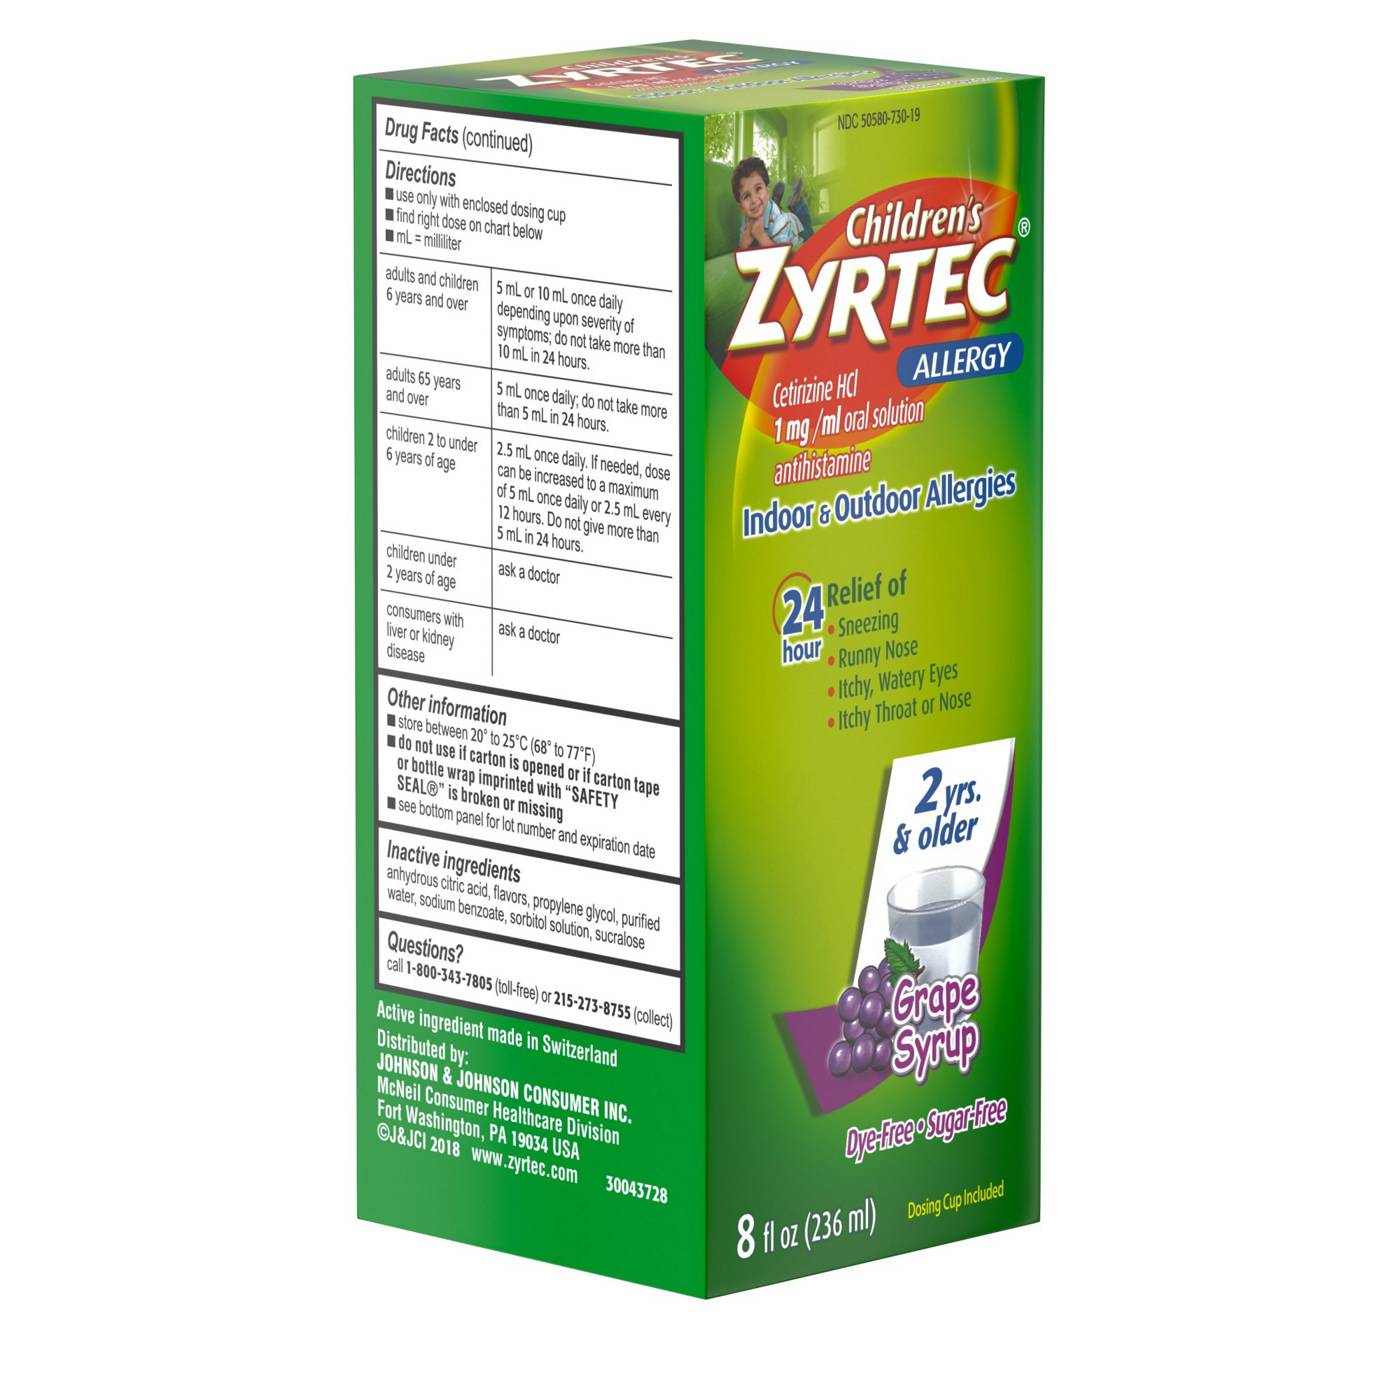 Zyrtec Children's Allergy Syrup - Grape; image 4 of 8